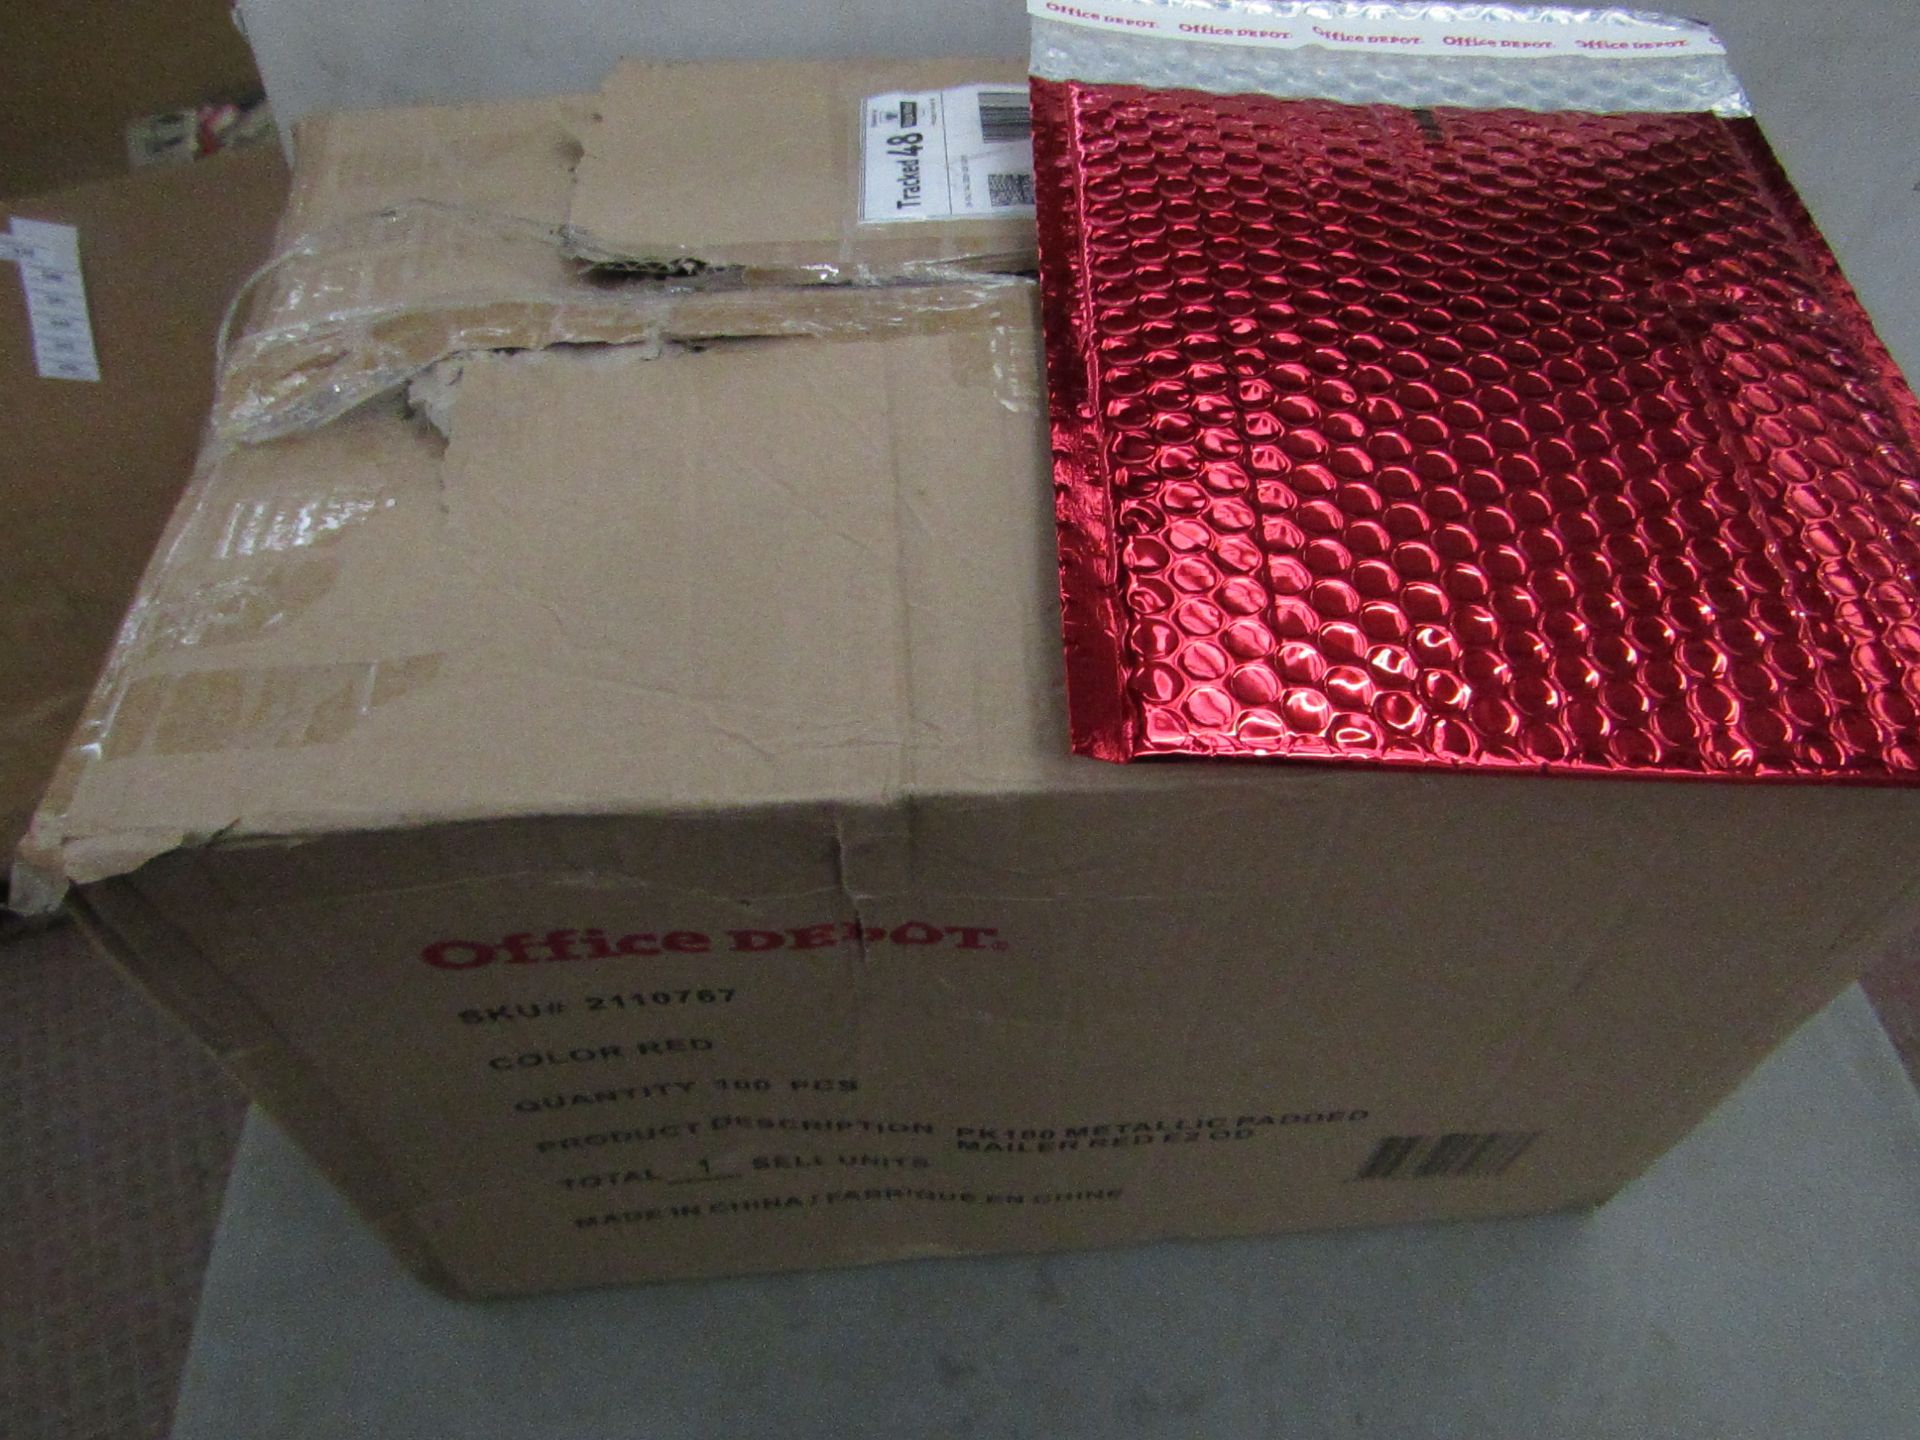 Office Depot - Metallic Padded Mailer (Box of Approx 100) - Boxed.